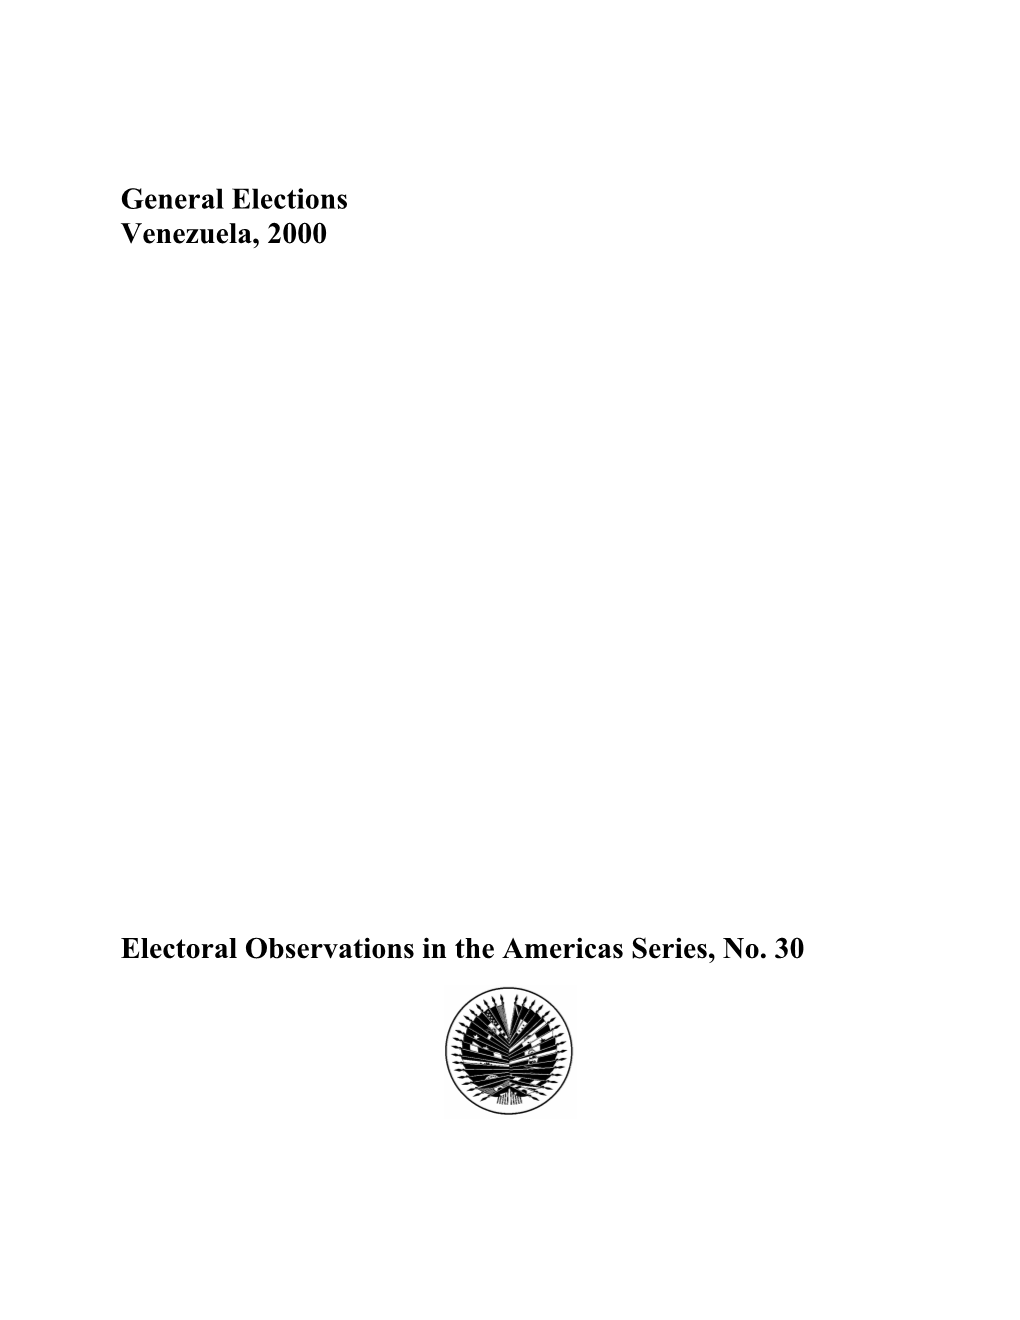 General Elections Venezuela, 2000 Electoral Observations in the Americas Series, No. 30